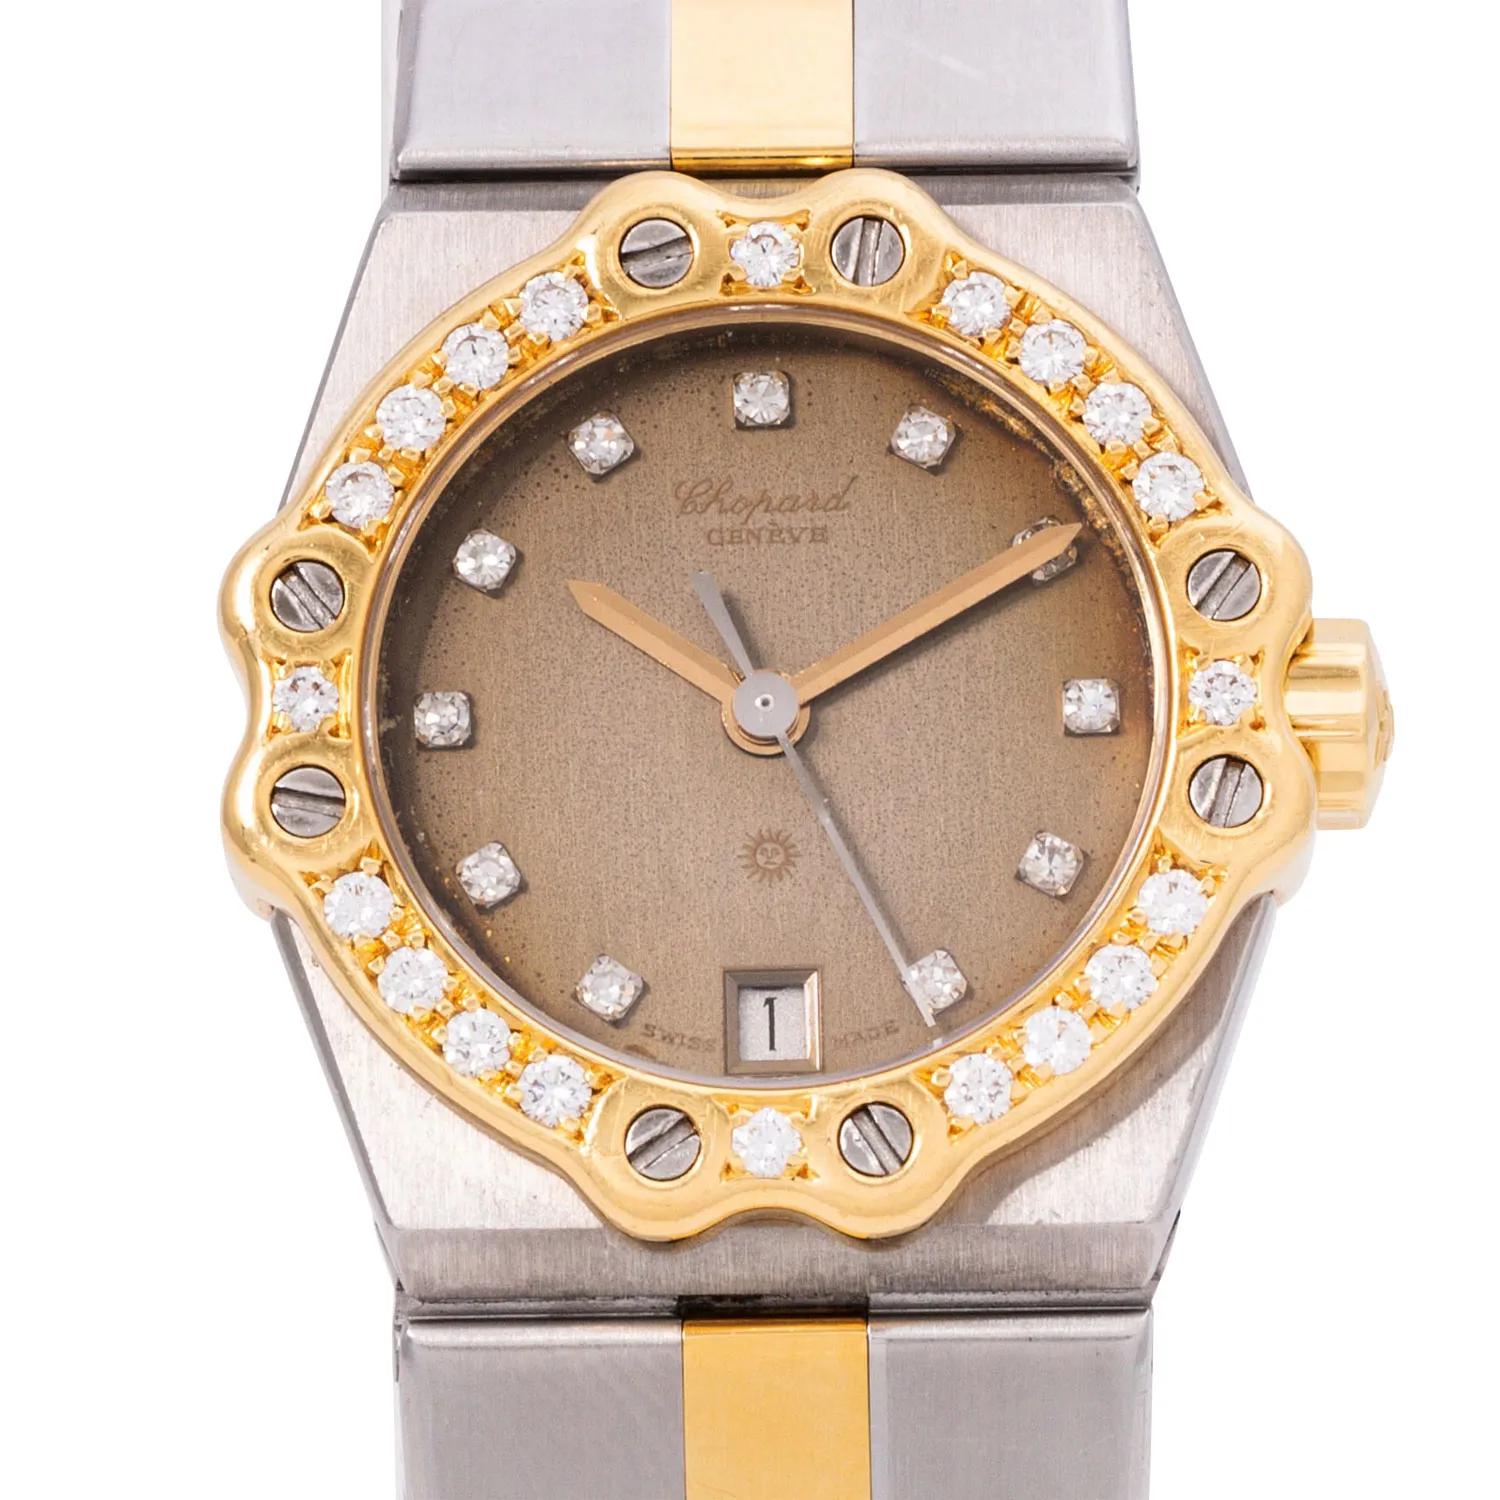 Chopard St. Moritz 8024/11 24mm Yellow gold, stainless steel and diamond-set Gray